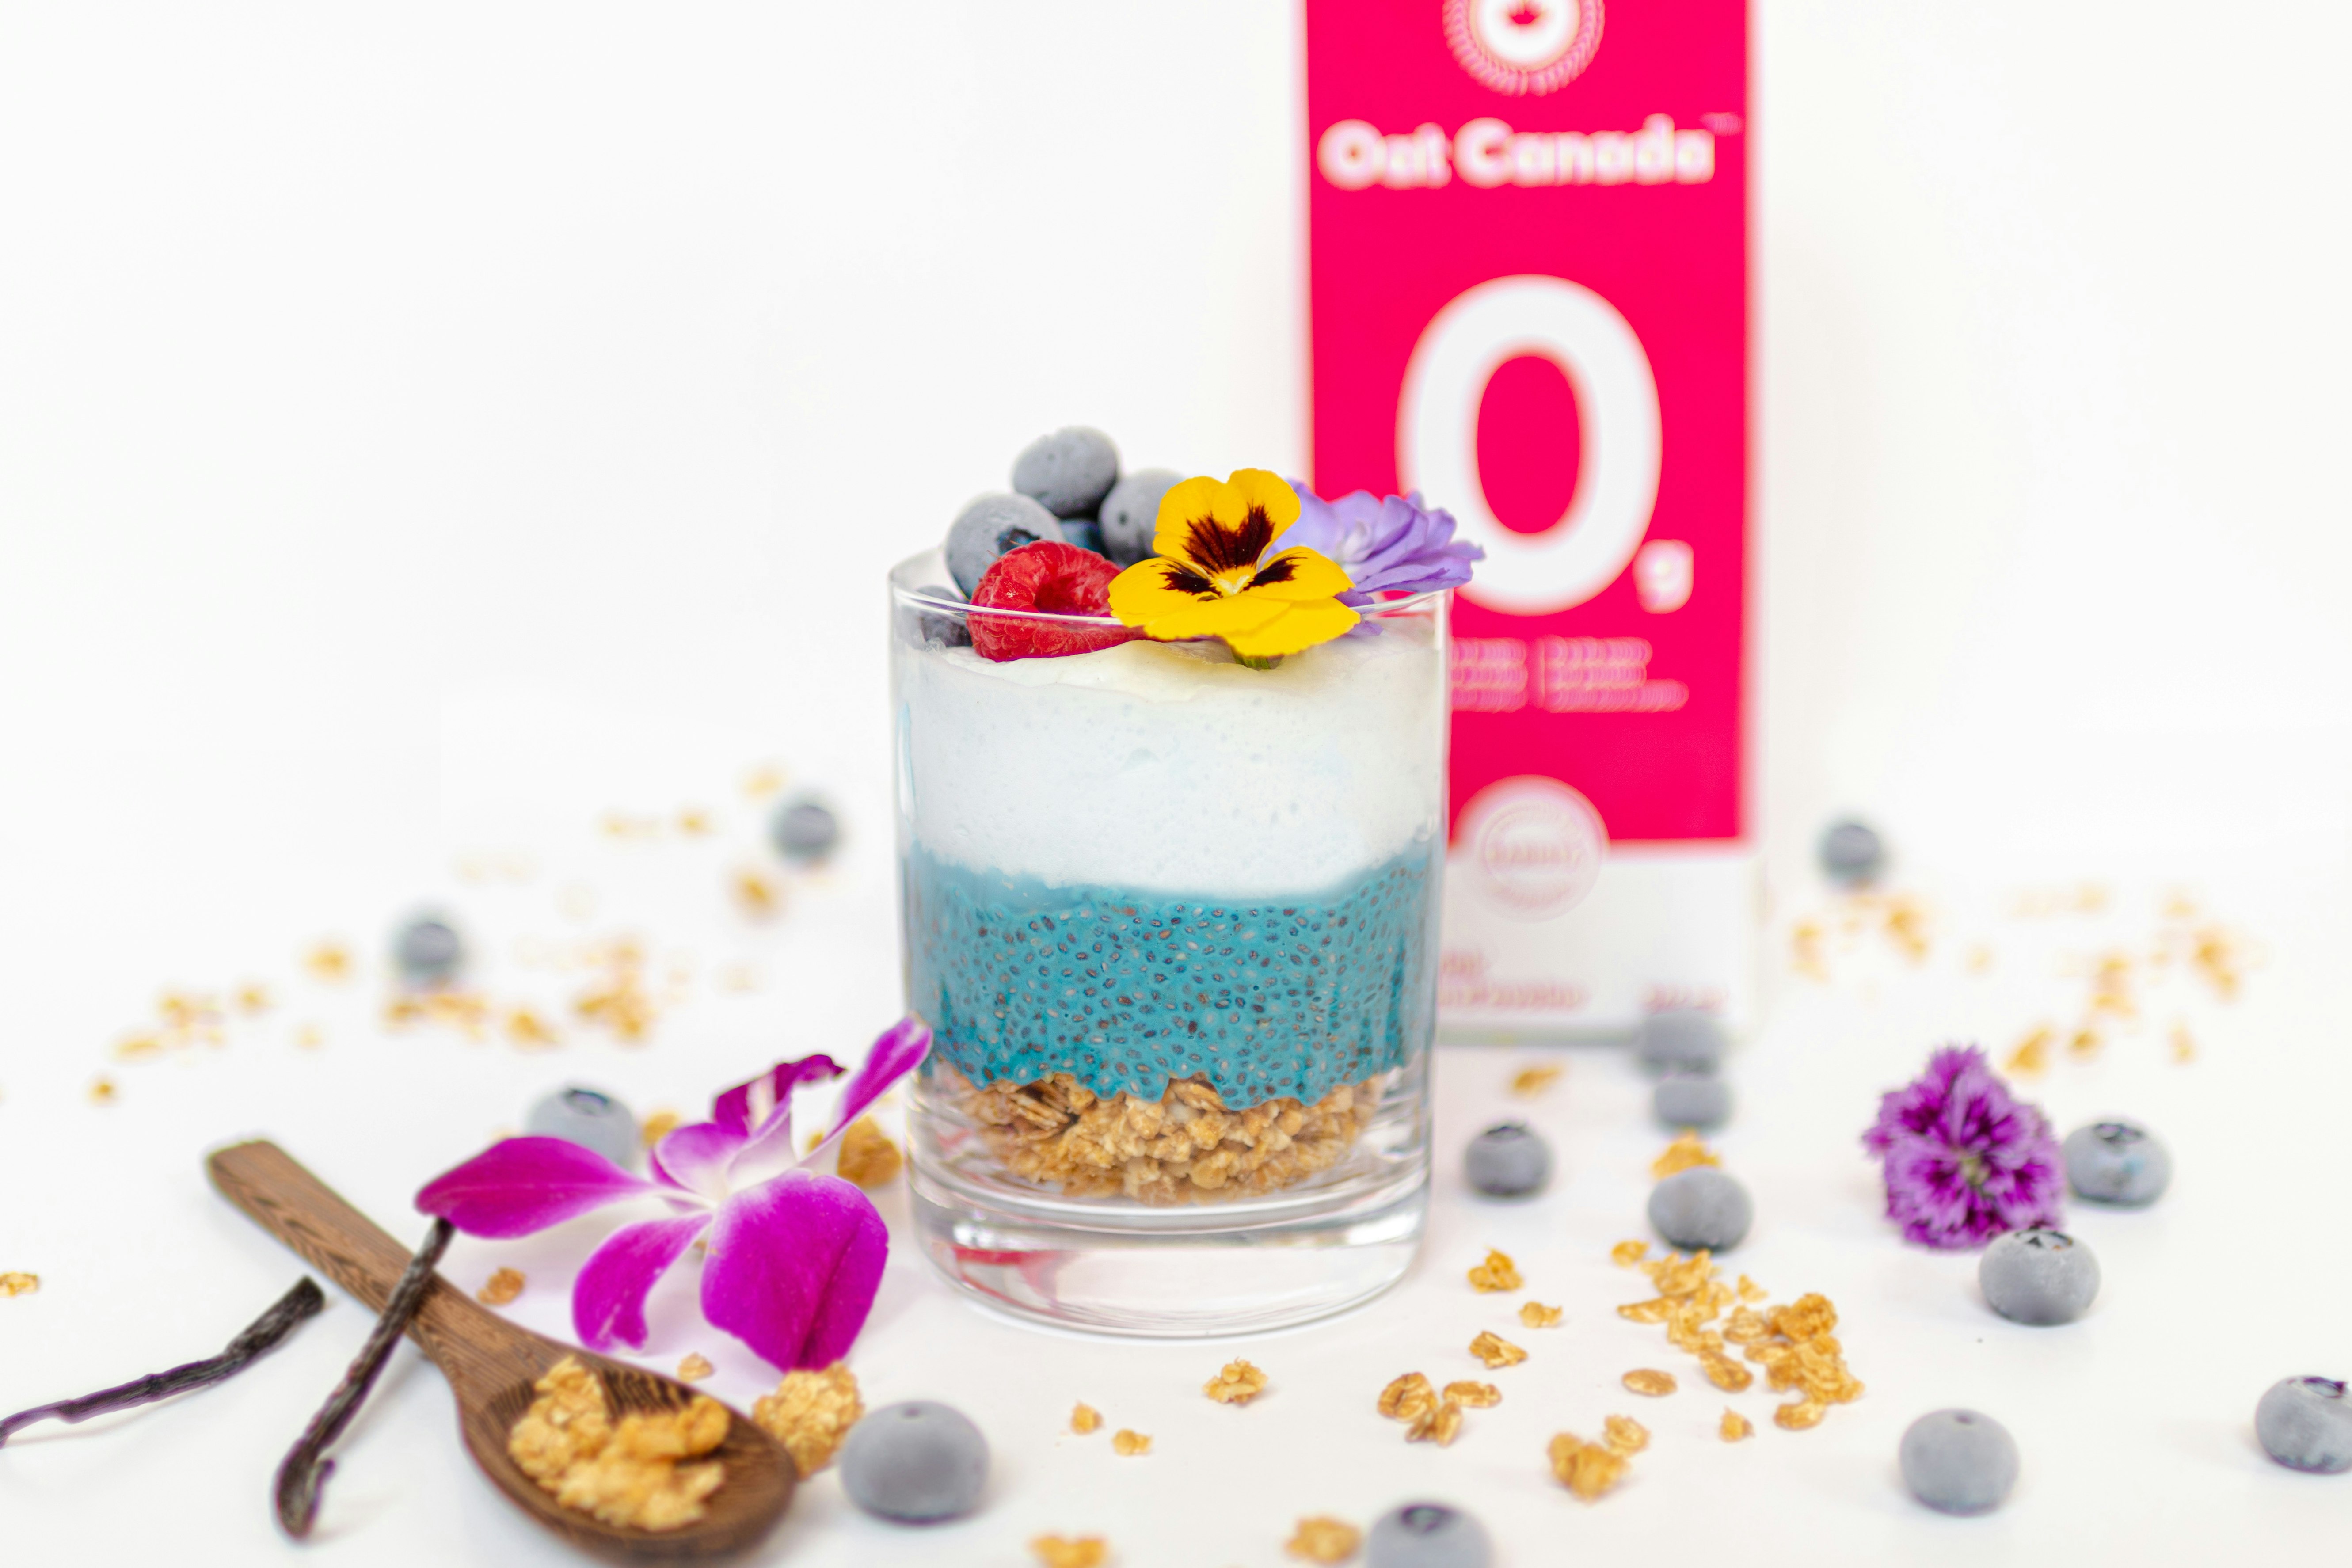 Start your day with Oat Canada's 0g of sugar oat milk. ☀️      
Here’s an easy vegan chia pudding breakfast! Serves 2 to 3. Recipe below👇     
     
Top layer:     
Garnish of your choice. We used blueberries, raspberries, and edible flowers. 🌸 Top these on some coconut whipped cream.      
     
Chia pudding layer:     
8 tbsp chia seeds     
300 mL Oat Canada 0g of sugar oat milk      
1 tsp ceremonial grade matcha powder     
1 tbsp blue spirulina powder     
1/4 tsp Madagascar vanilla bean    
2 tsp organic maple syrup     
    
     
Bottom layer:     
Granola      

Visit  https://www.oatcanada.com/